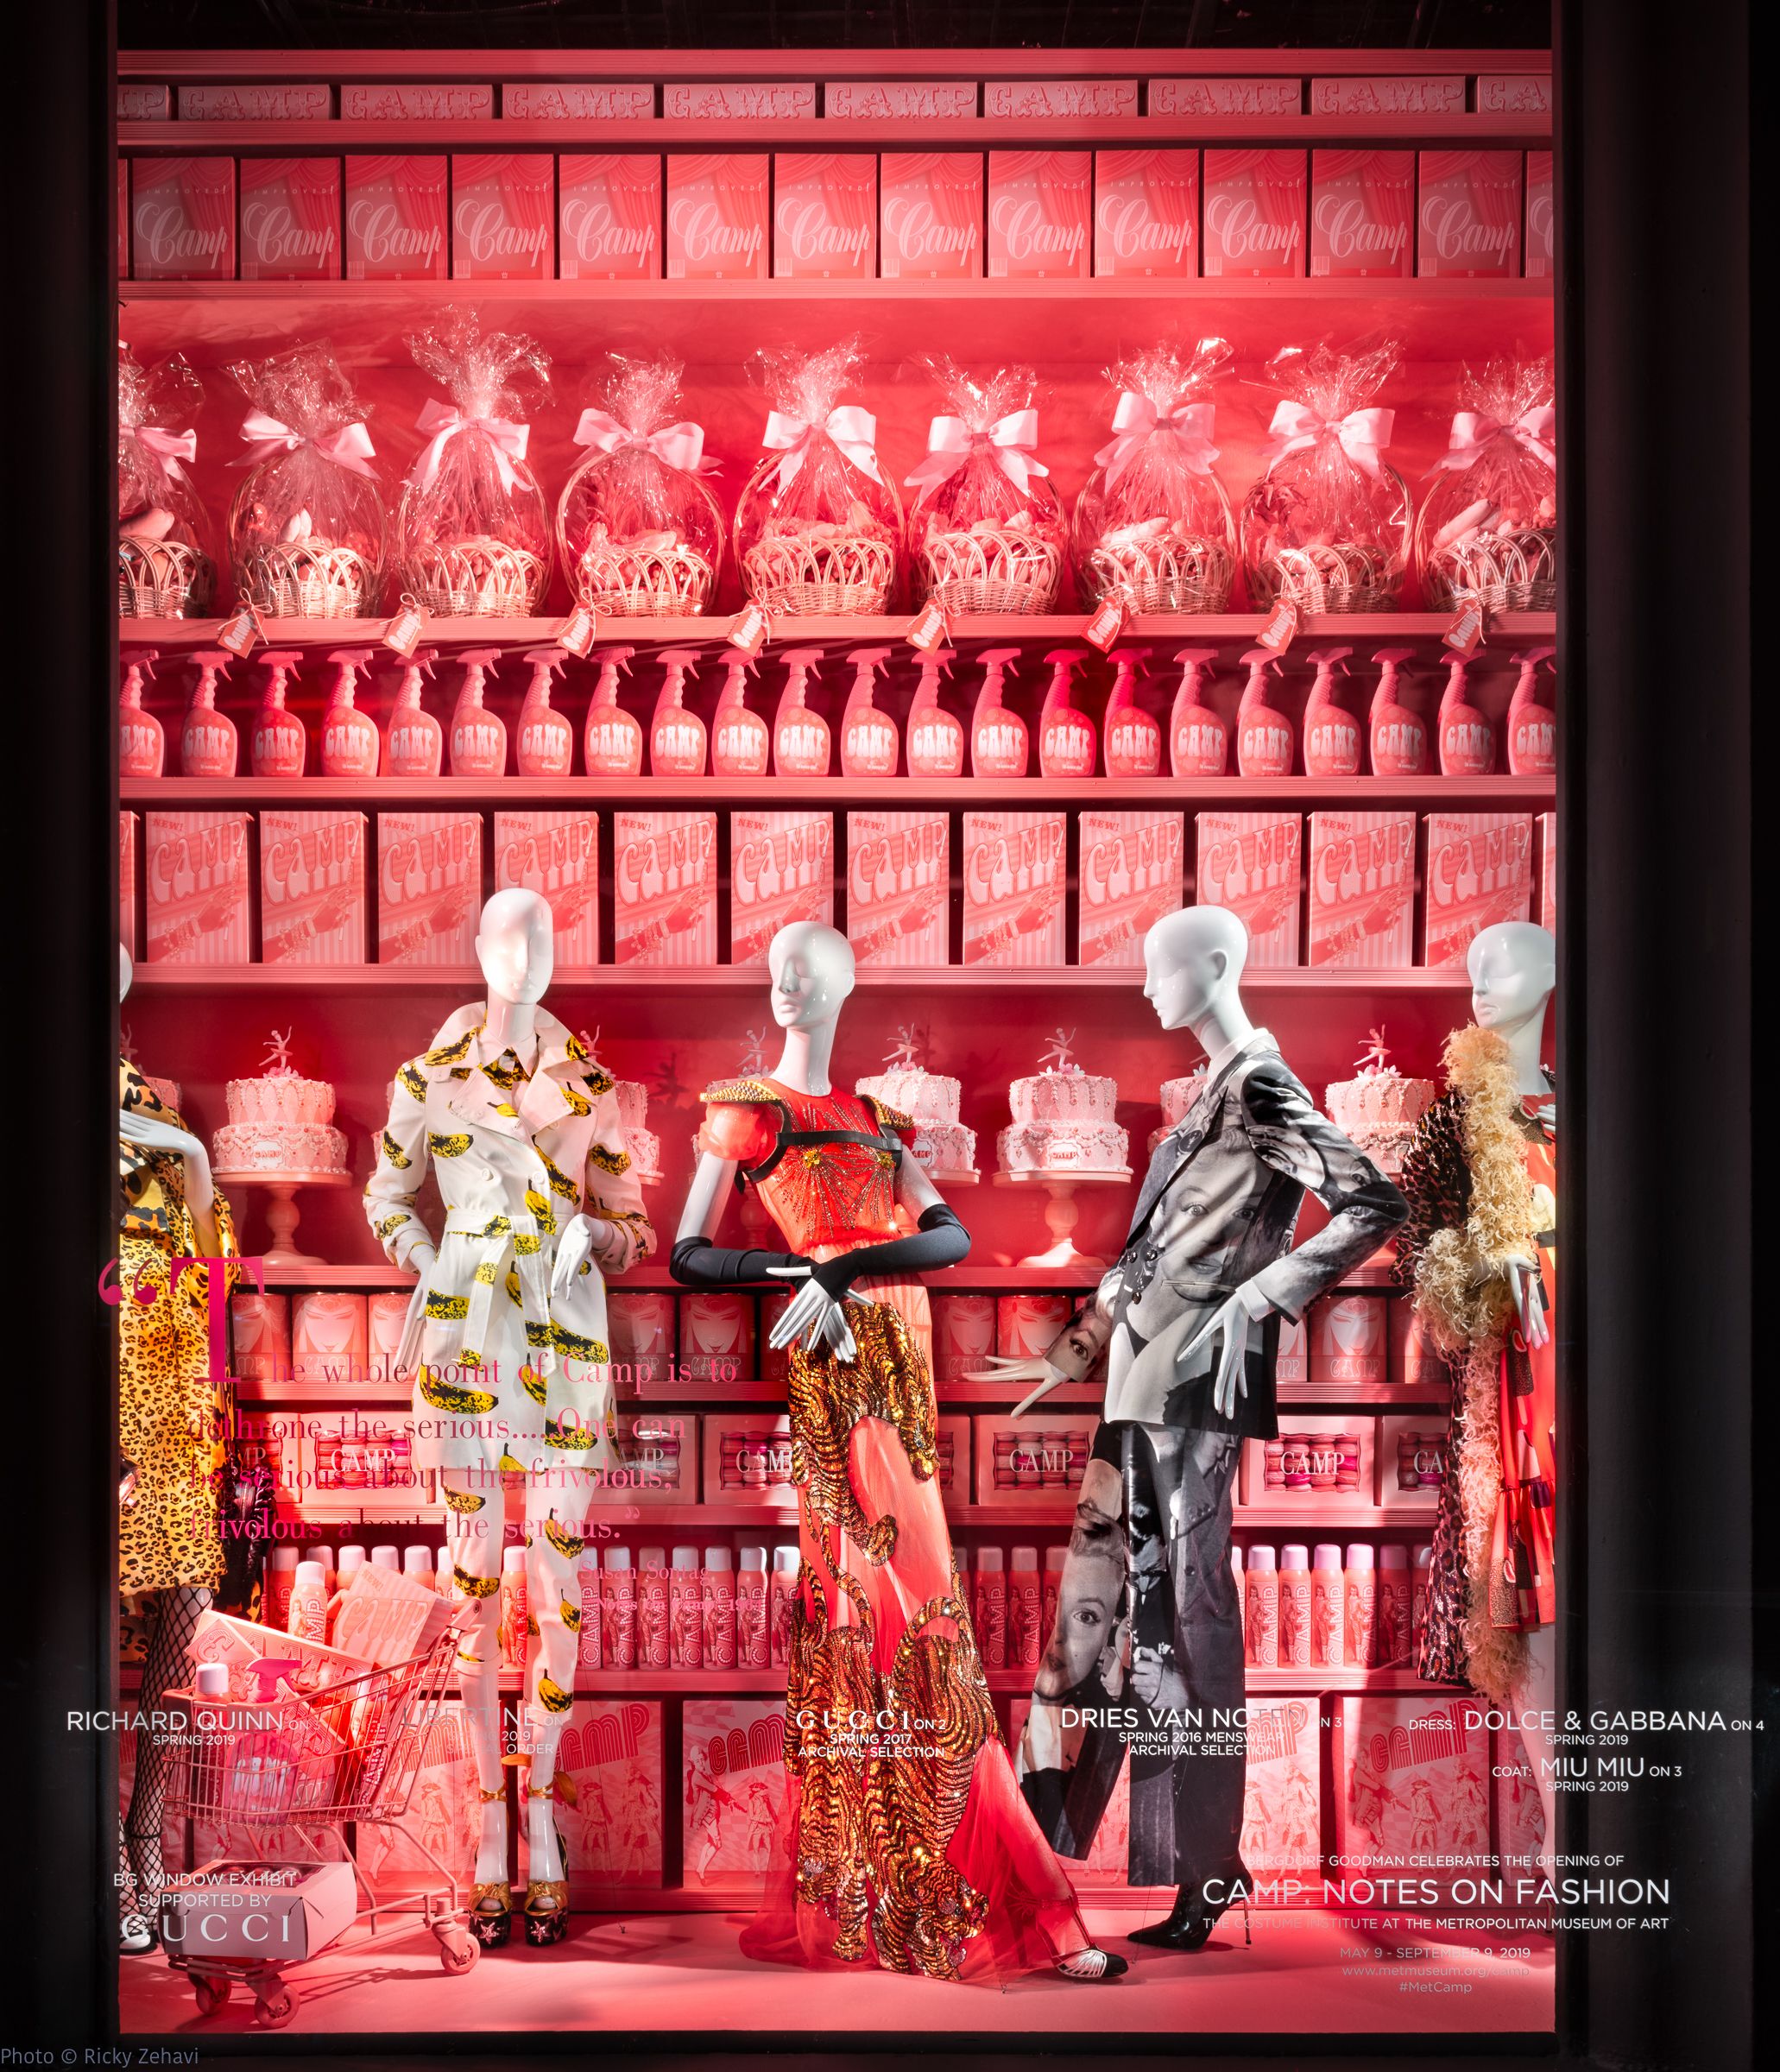 Window Shopping in a Hypnopompic State: Bergdorf Goodman X Kustaa Saksi -  Irenebrination: Notes on Architecture, Art, Fashion, Fashion Law, Science &  Technology